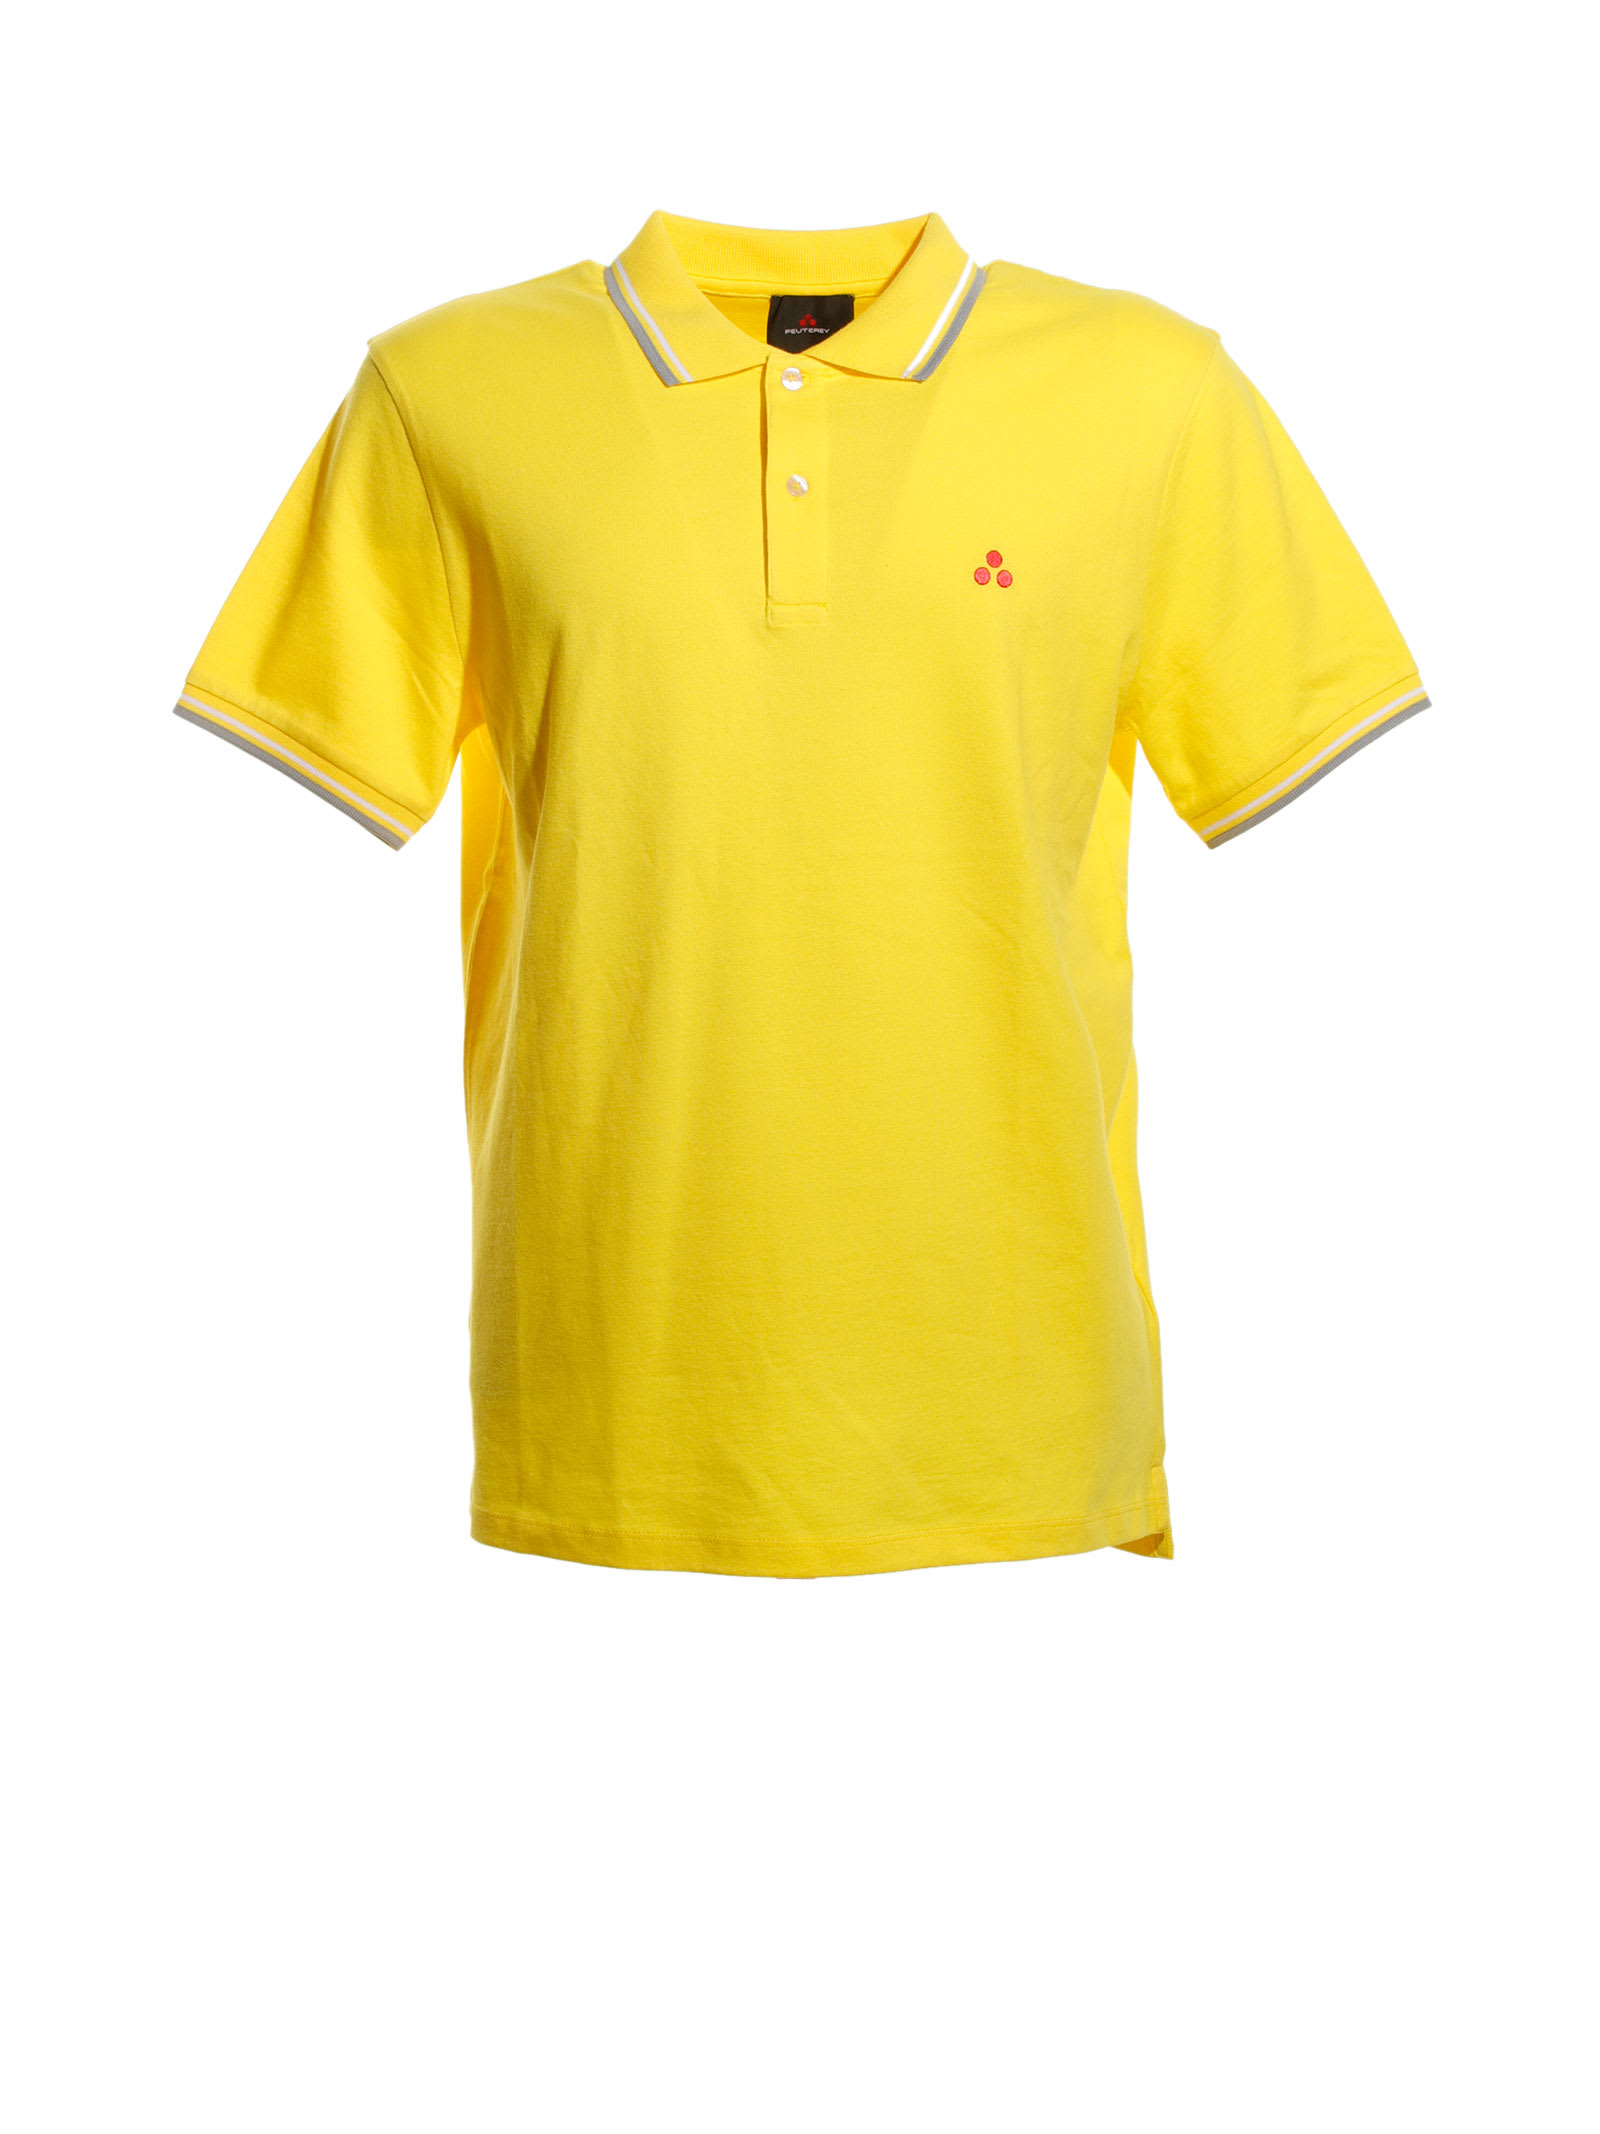 PEUTEREY YELLOW POLO SHIRT WITH CONTRASTING LOGO